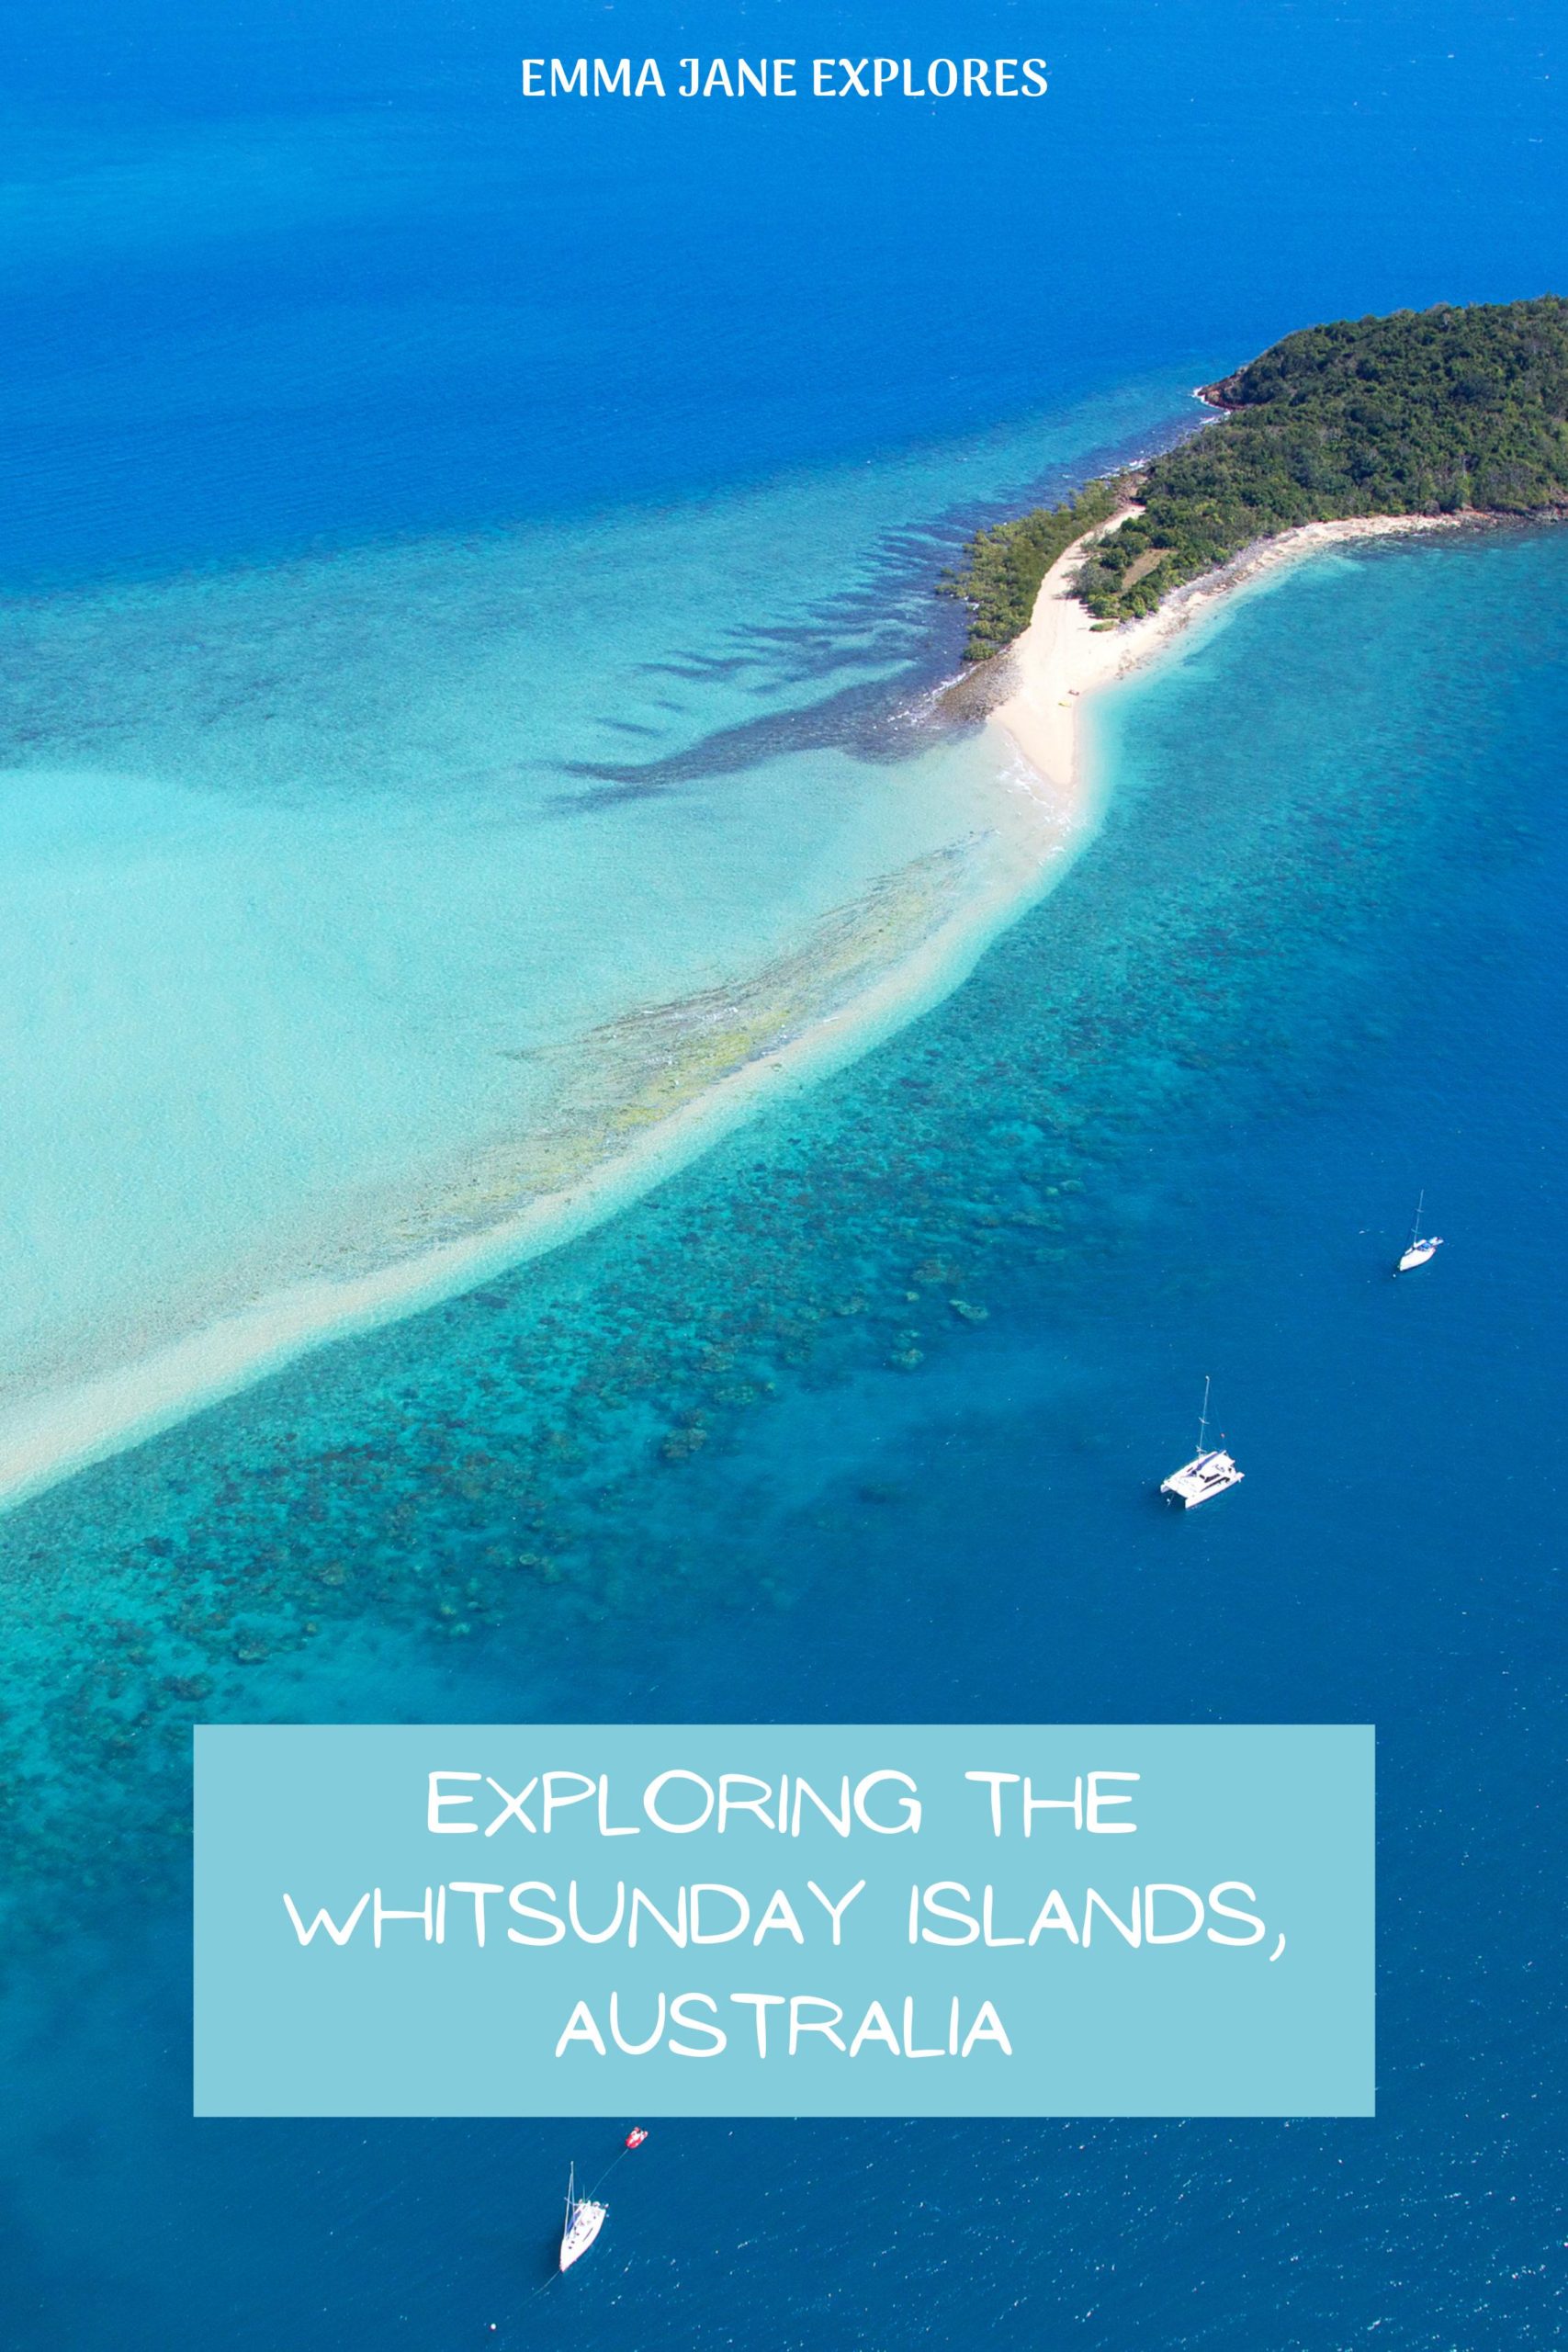 Things to do in the Whitsundays - Emma Jane Explores